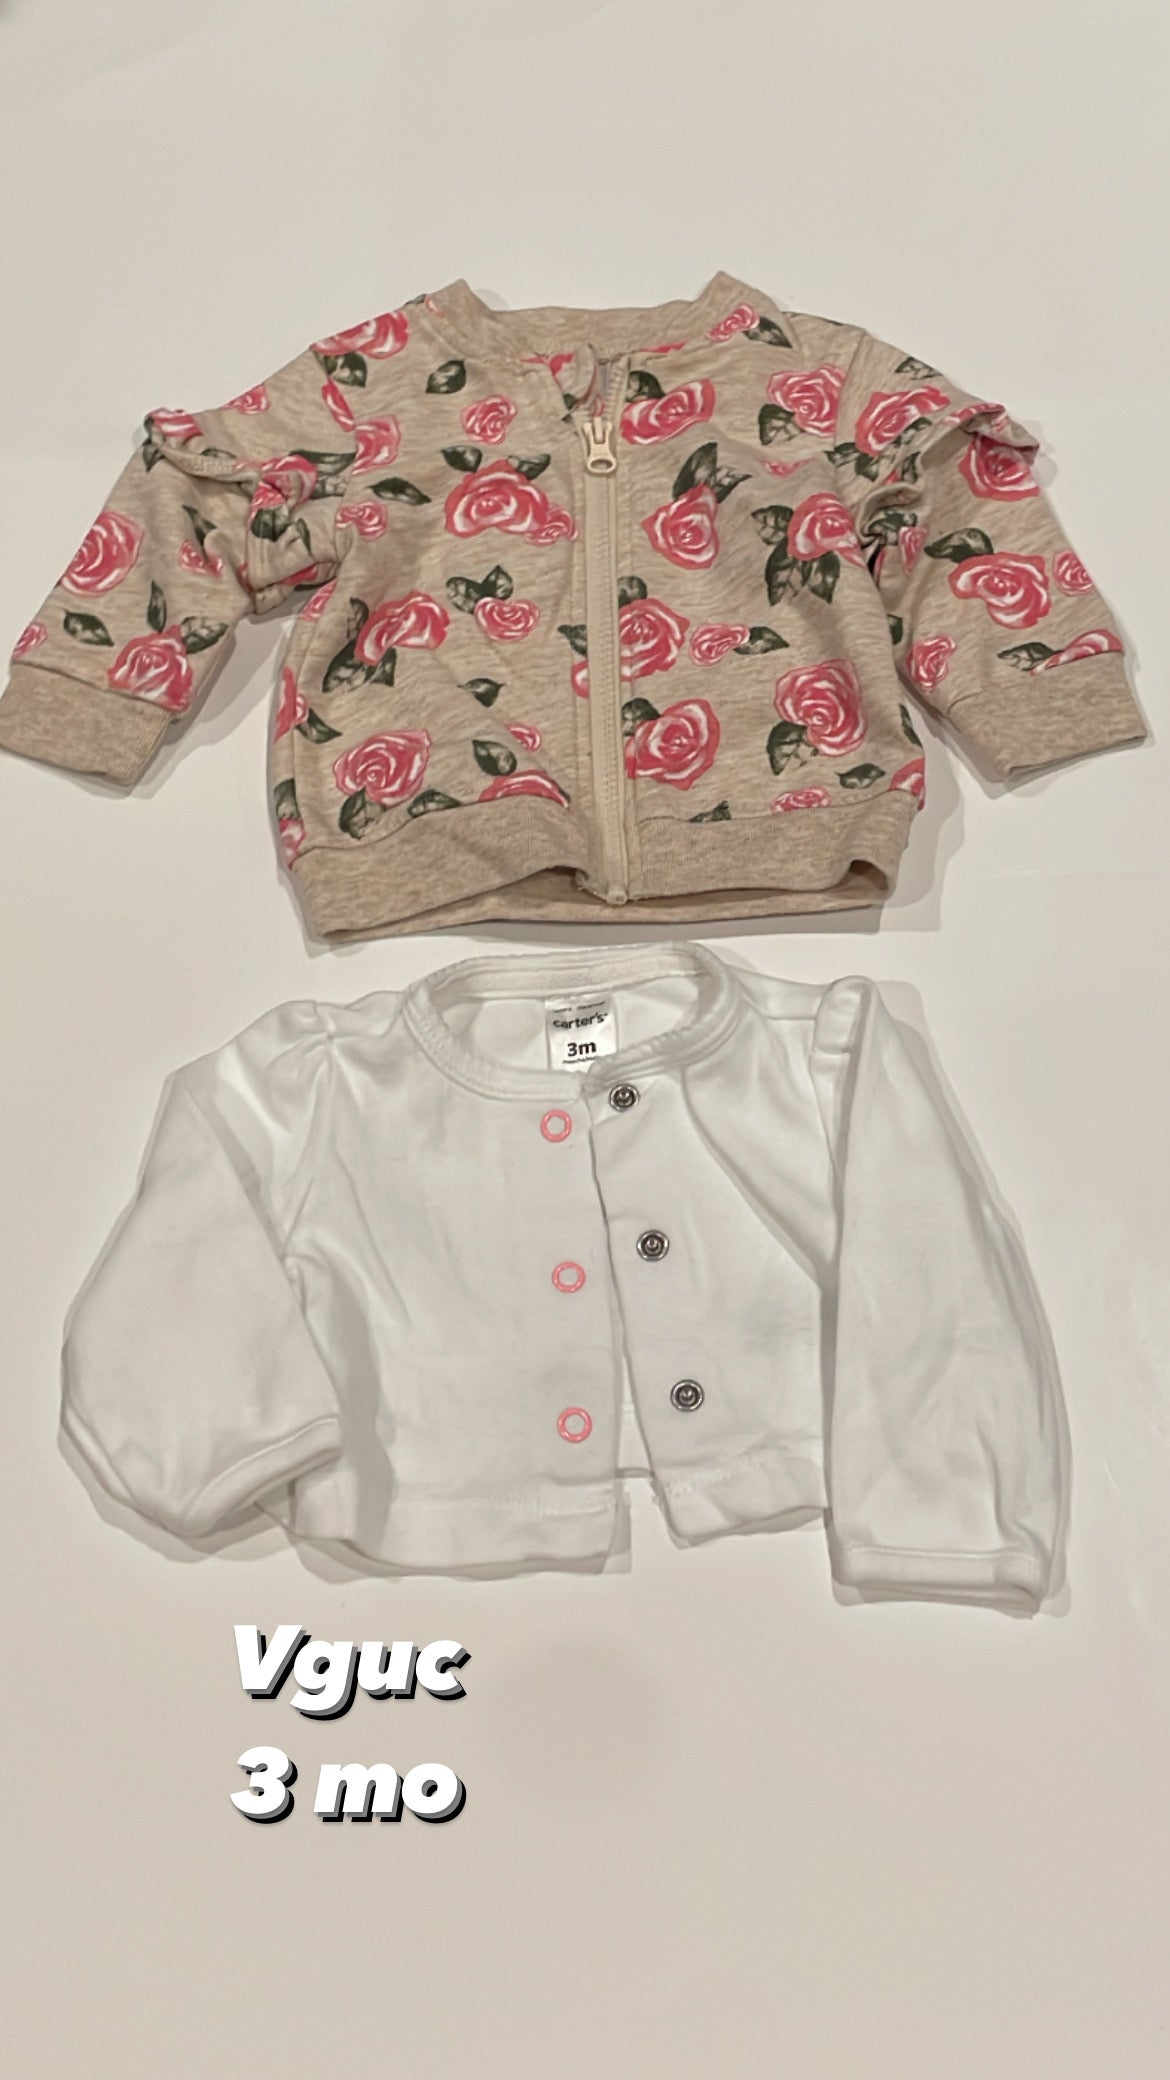 3 mo floral sweatshirt with ruffle shoulder and cropped white cardigan